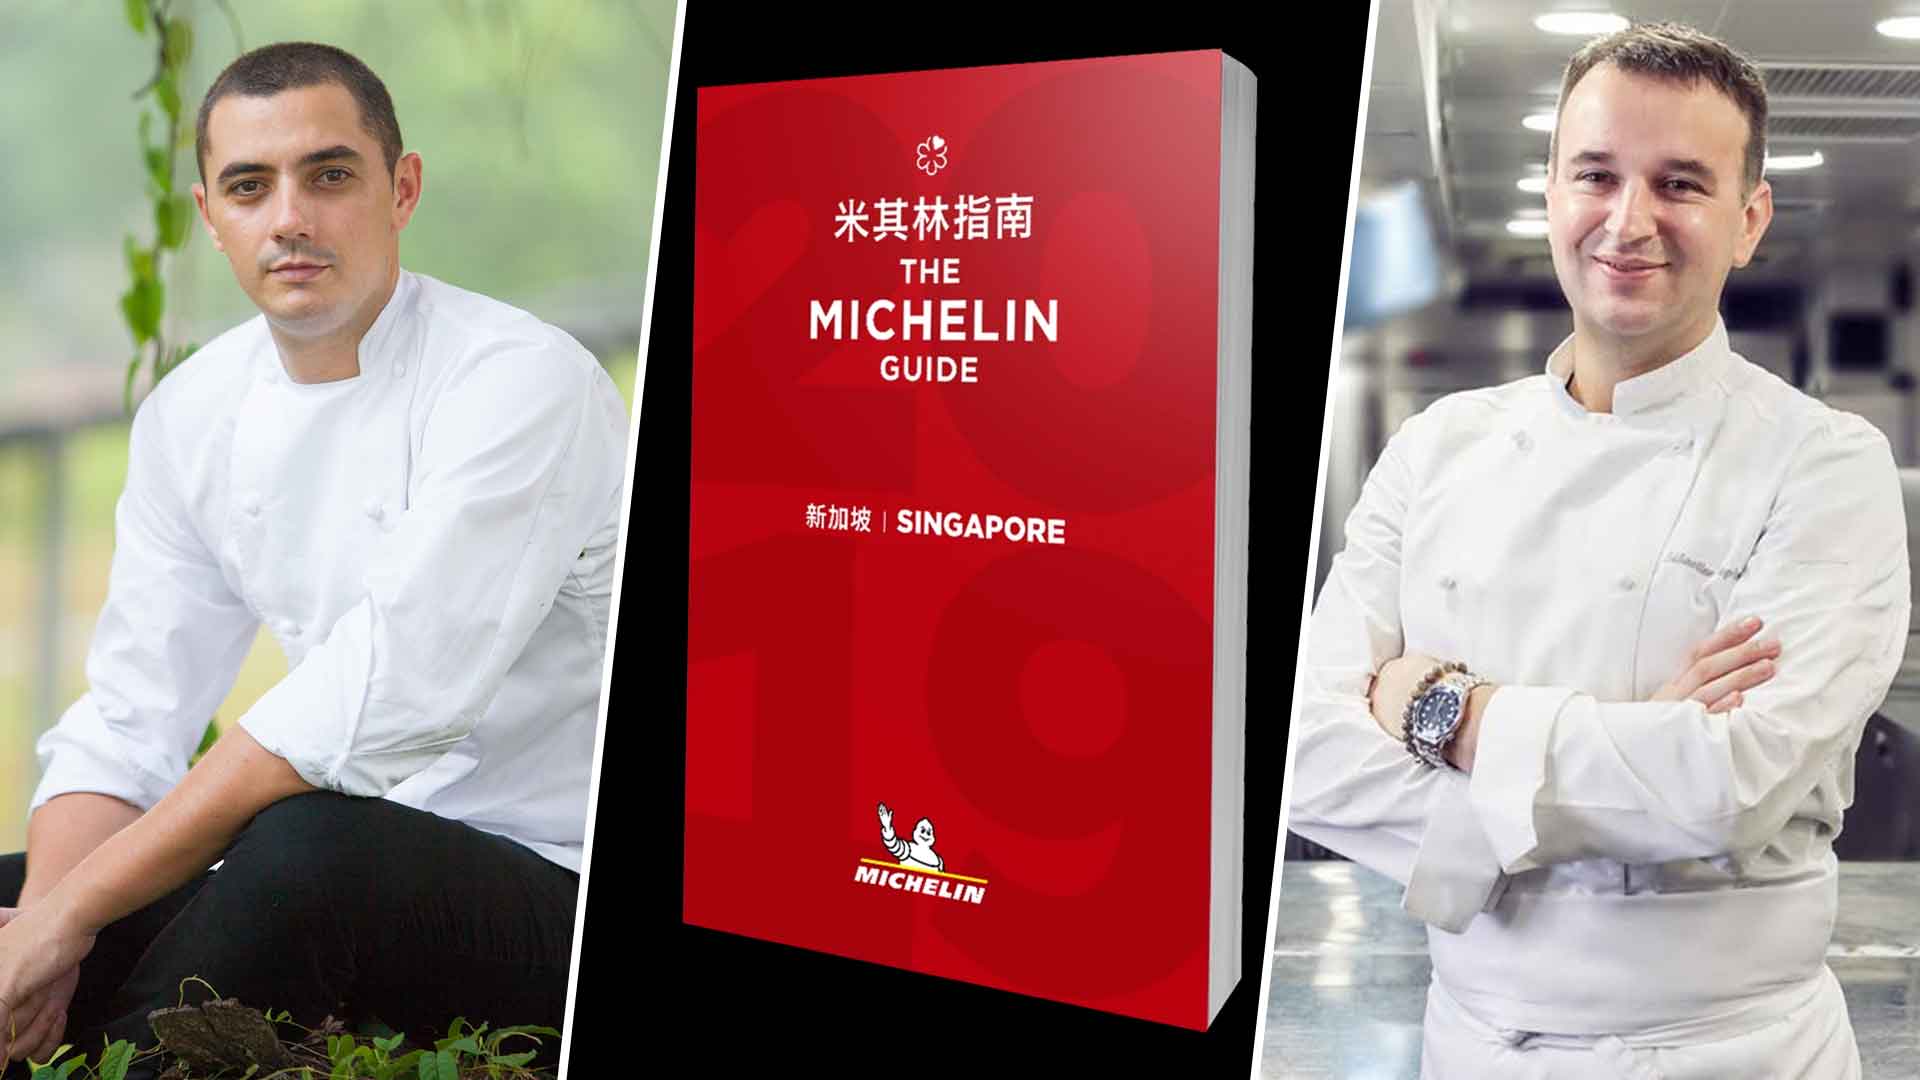 Odette & Les Amis Win Coveted Three Stars In The Michelin Guide Singapore 2019